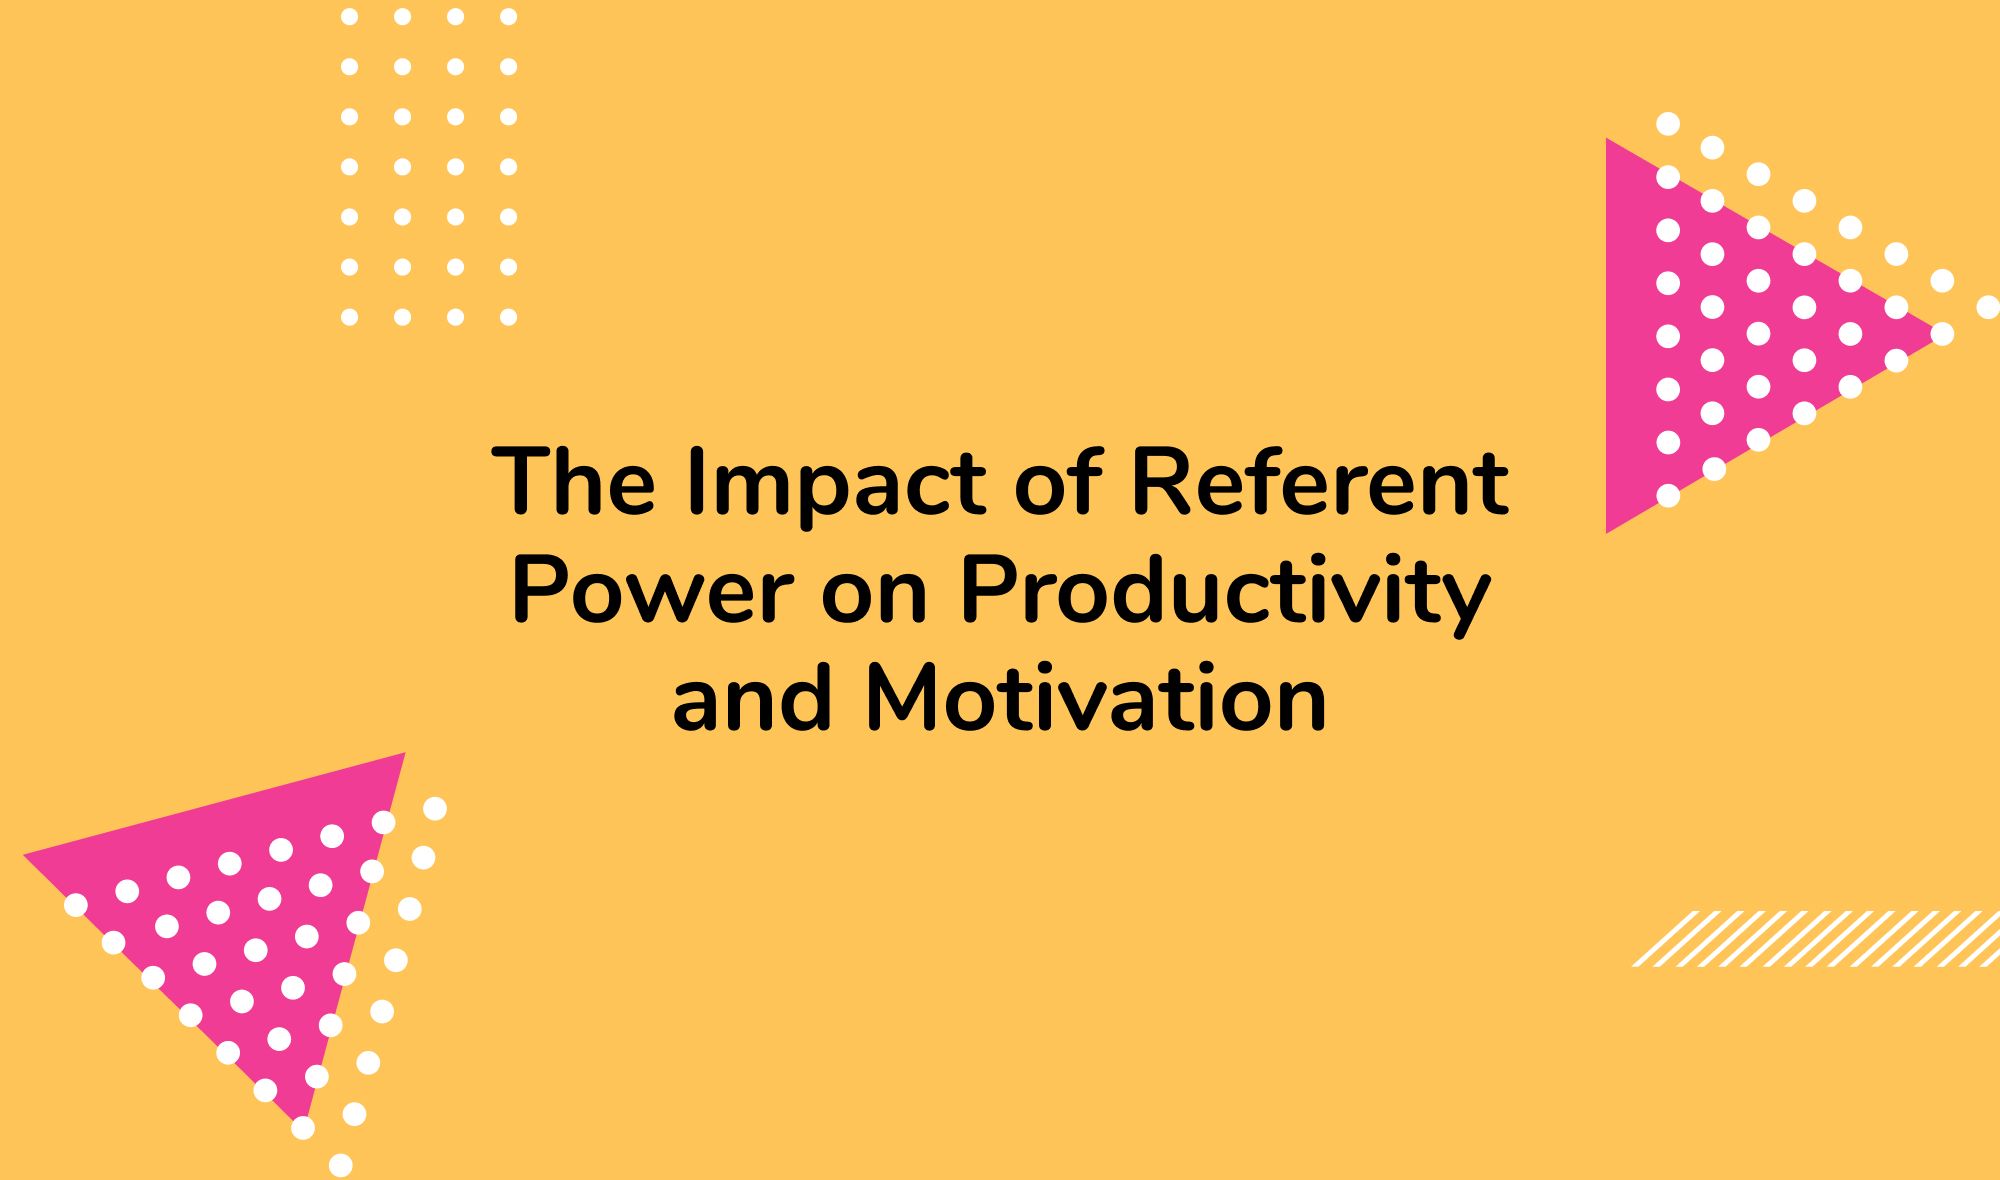 The Impact of Referent Power on Productivity and Motivation